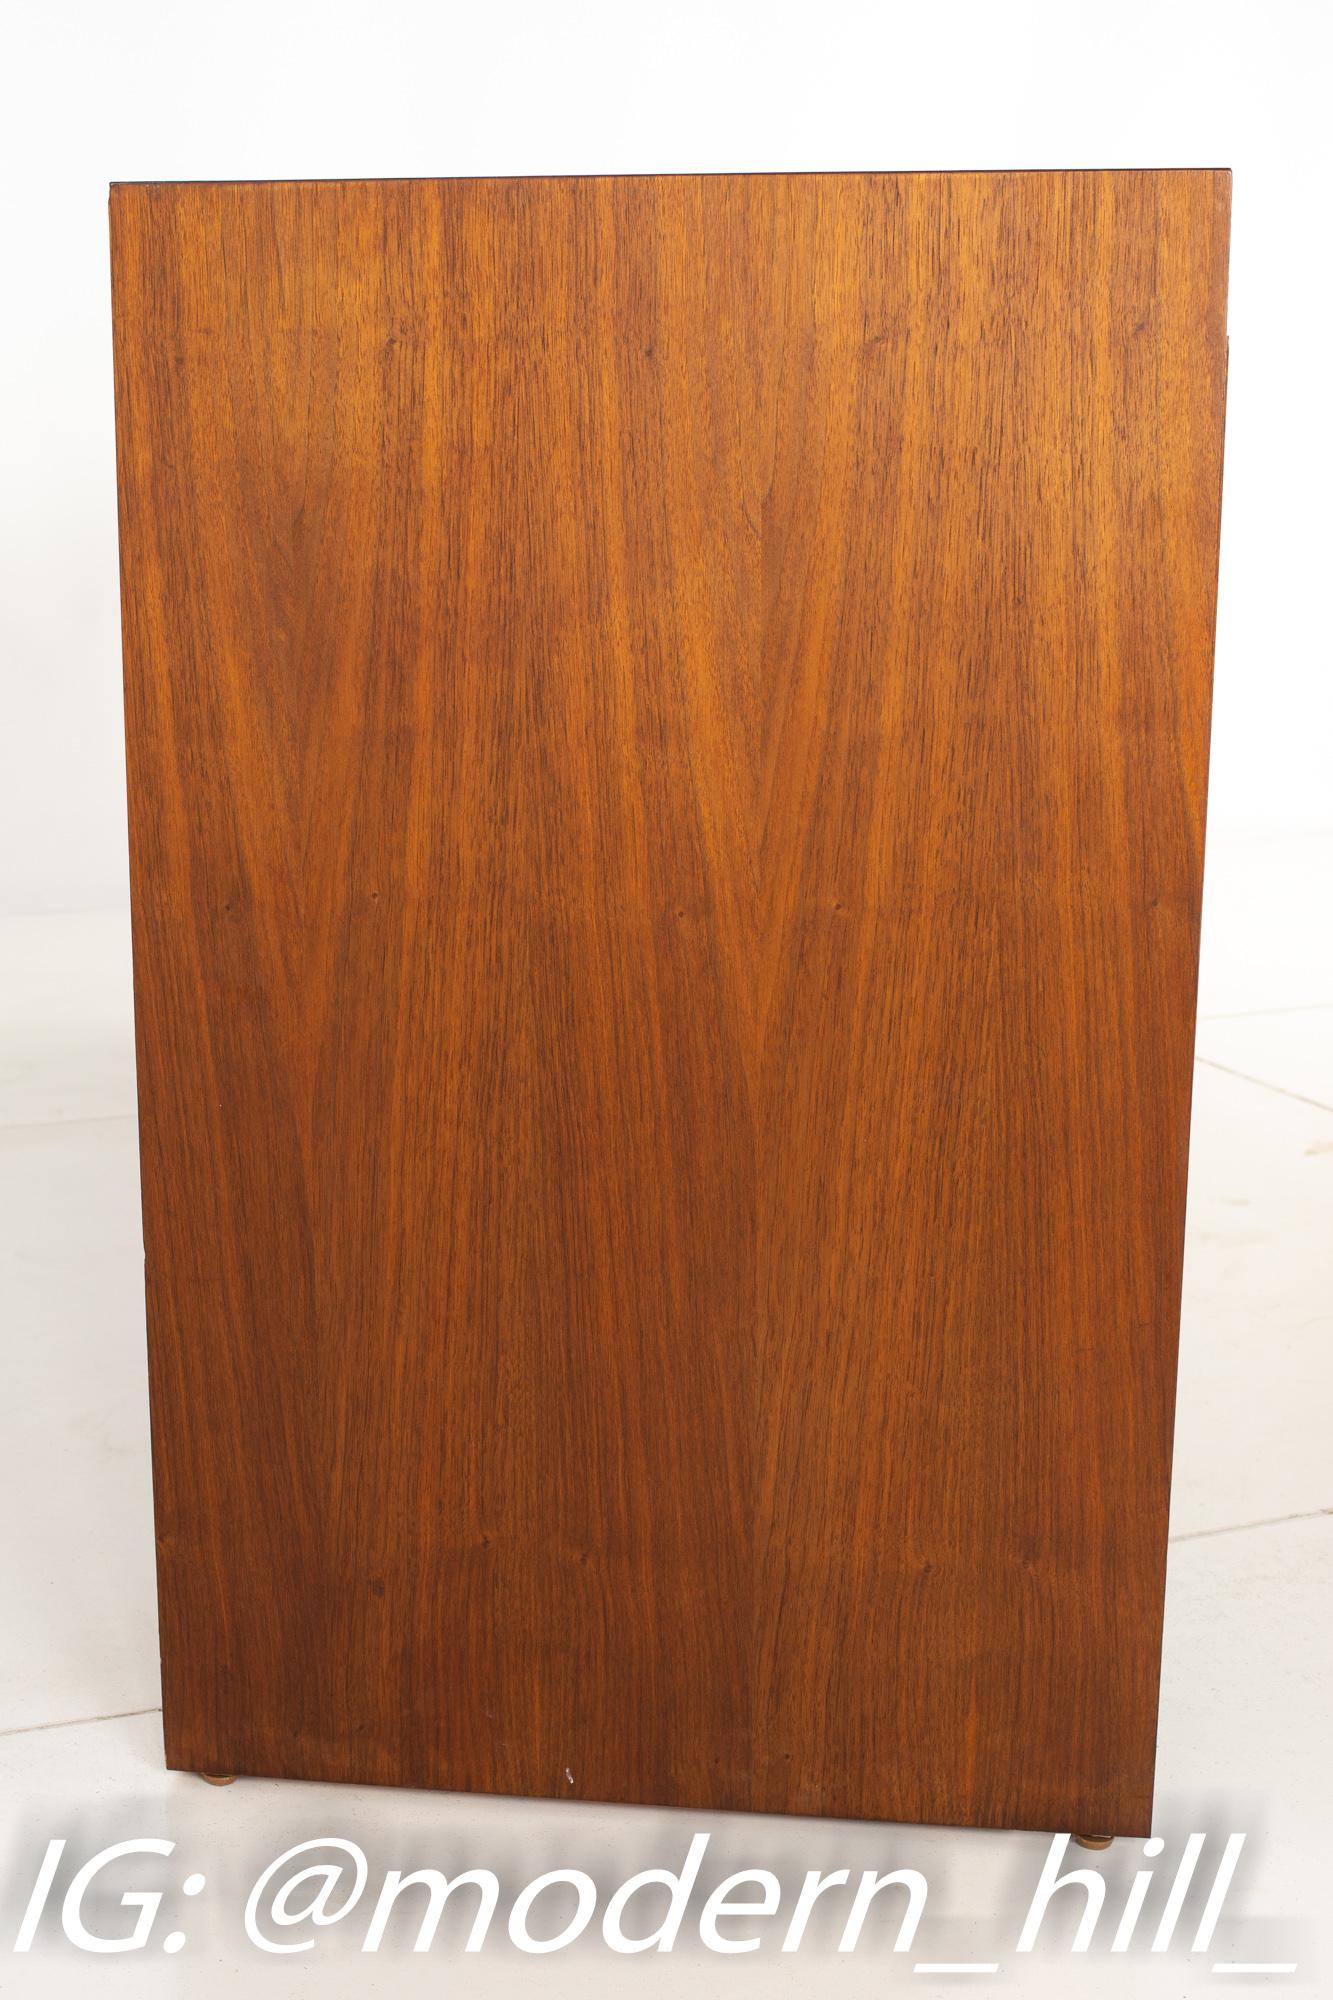 Dillingham Midcentury Pecky Cypress and Walnut Sideboard Credenza Buffet 1